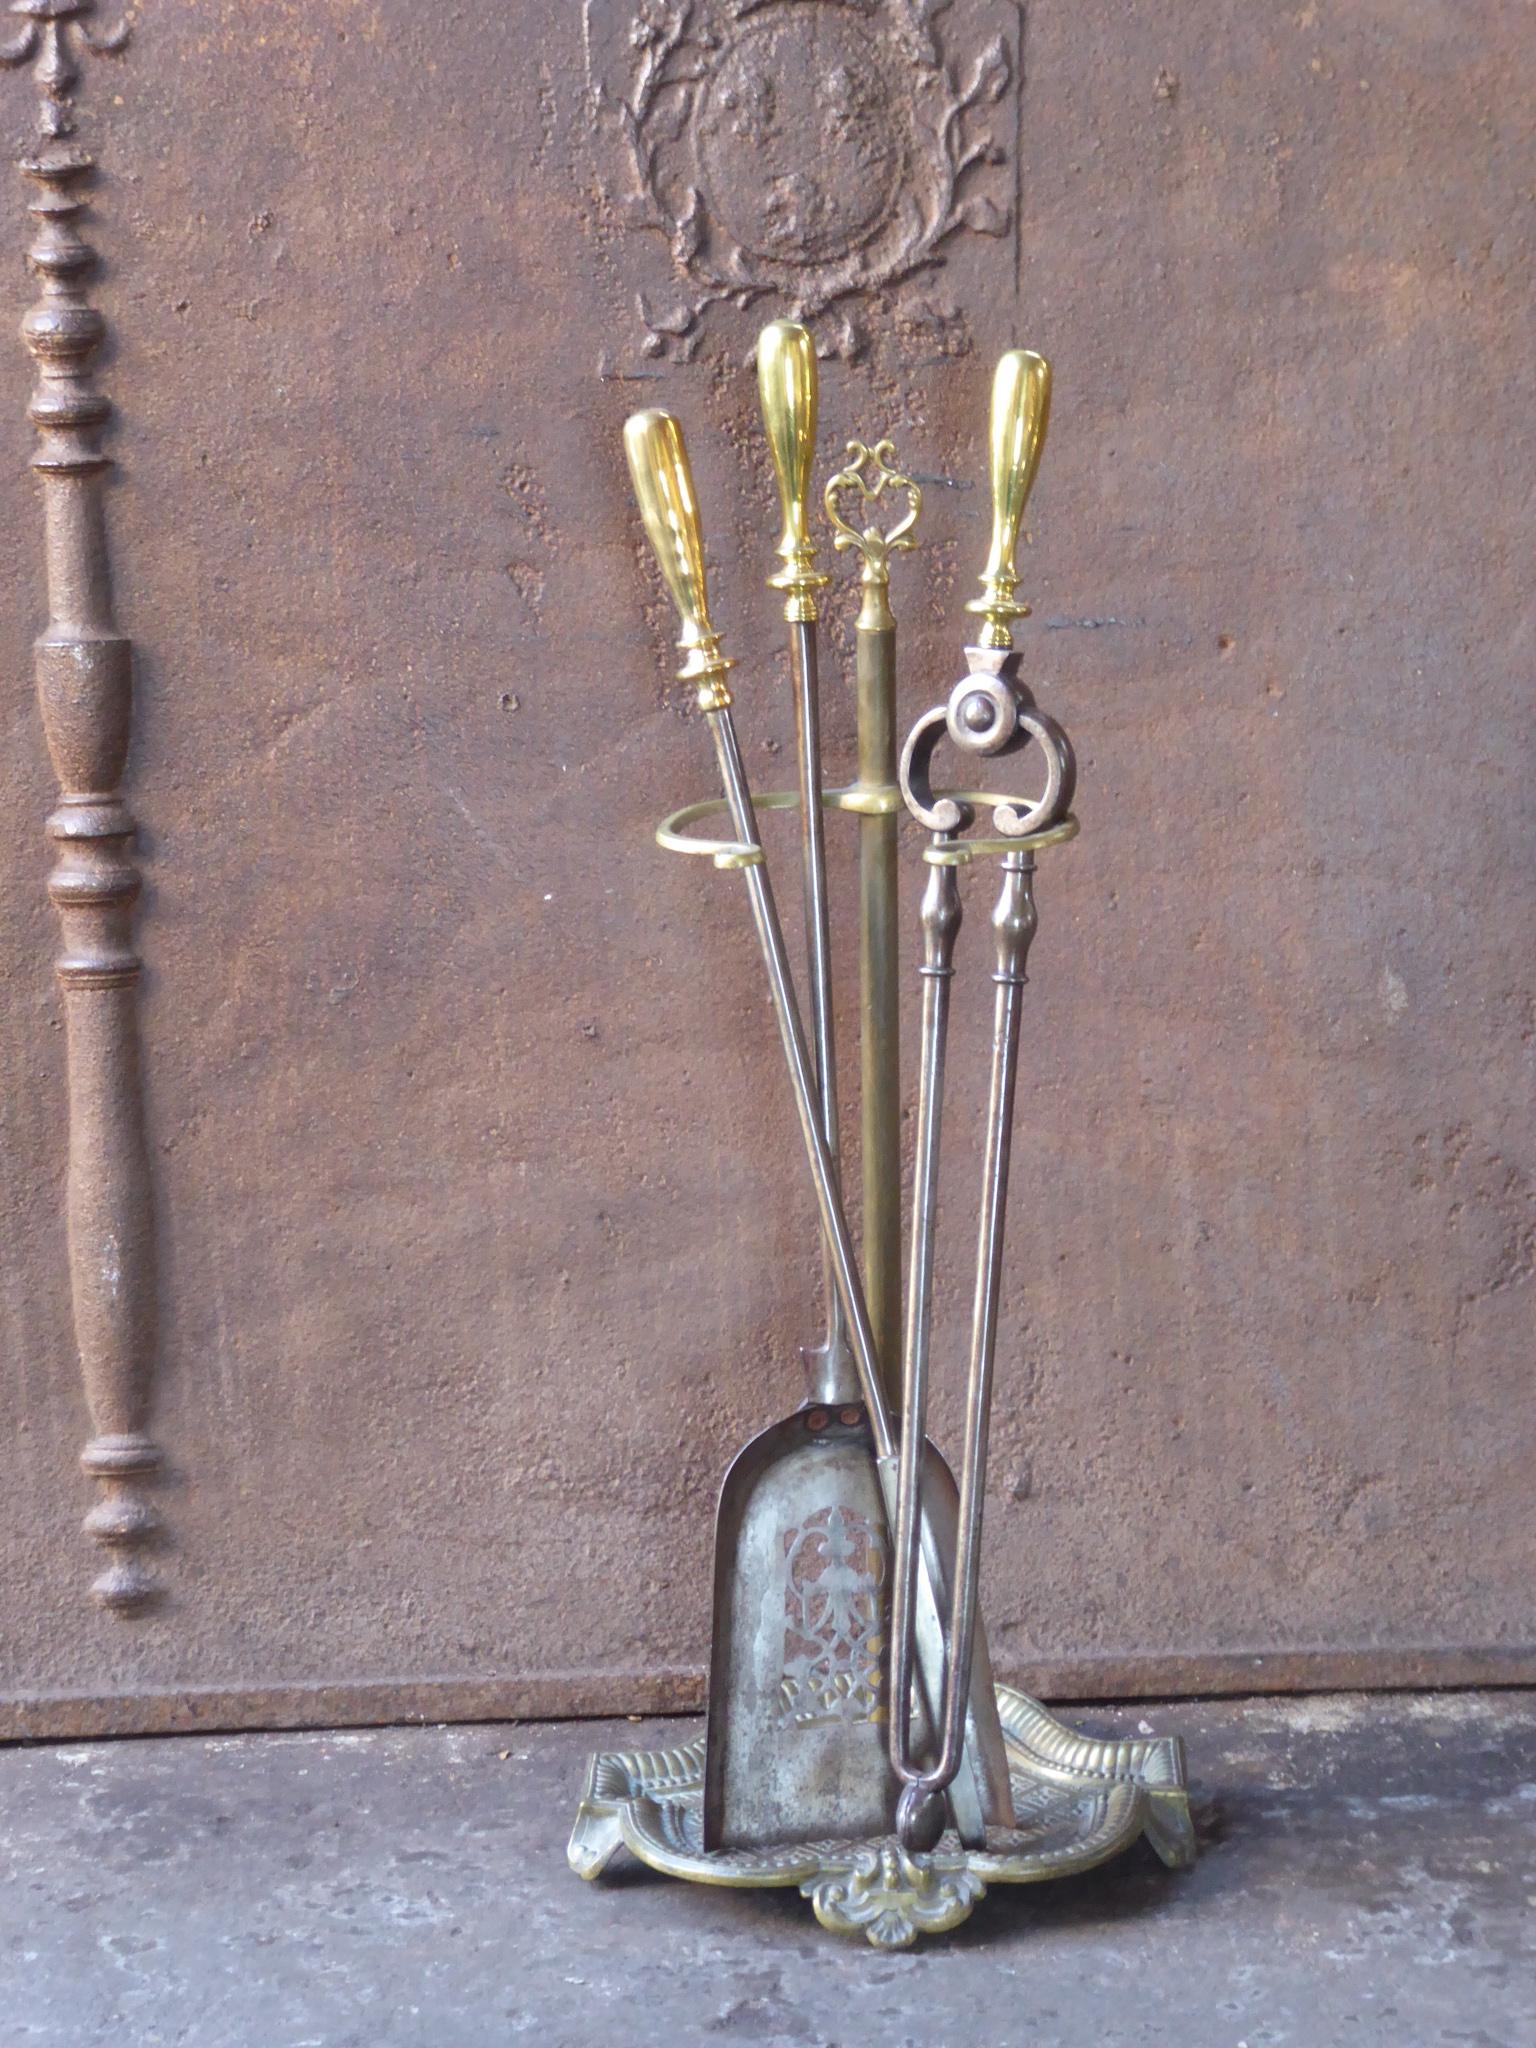 Georgian Fire Irons or Fireplace Tool Set, 18th-19th Century In Good Condition For Sale In Amerongen, NL